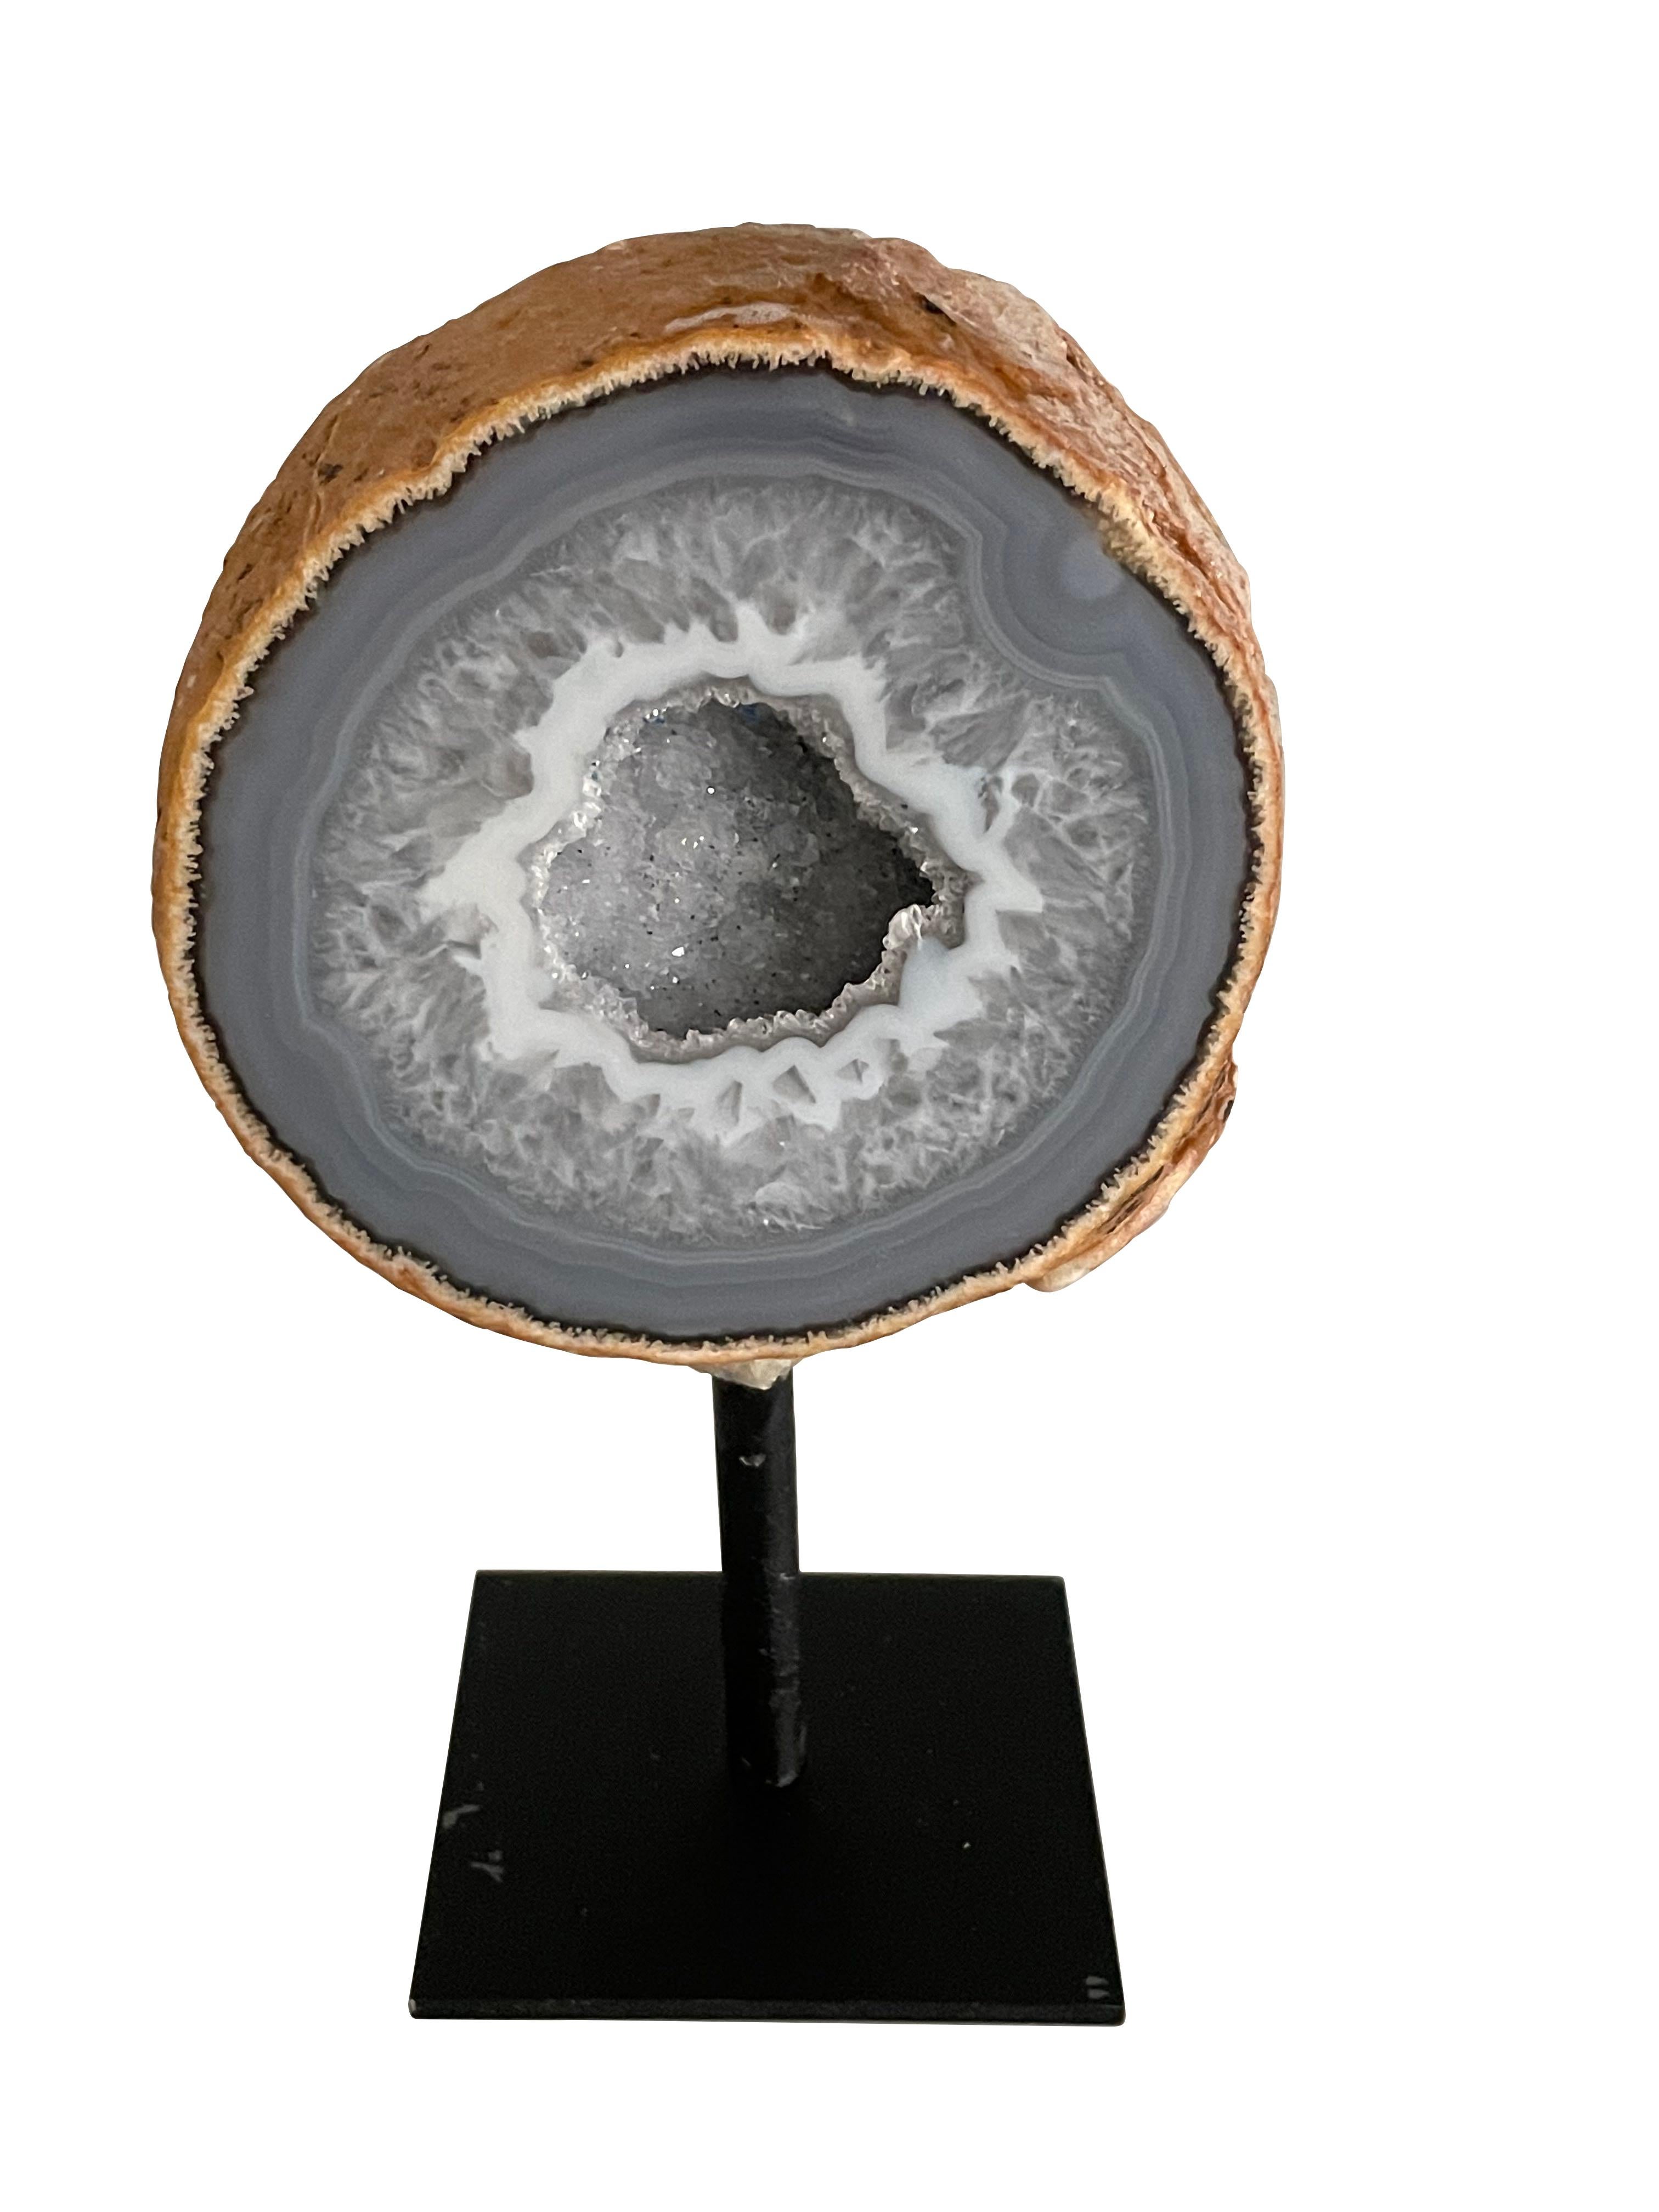 Grey Brazilian thick slice of agate mounted on a steel stand.
Agate is a banded form of finely-grained, microcrystalline Quartz. 
The lovely color patterns and banding make this translucent gemstone very unique. 
Agates can have many distinctive